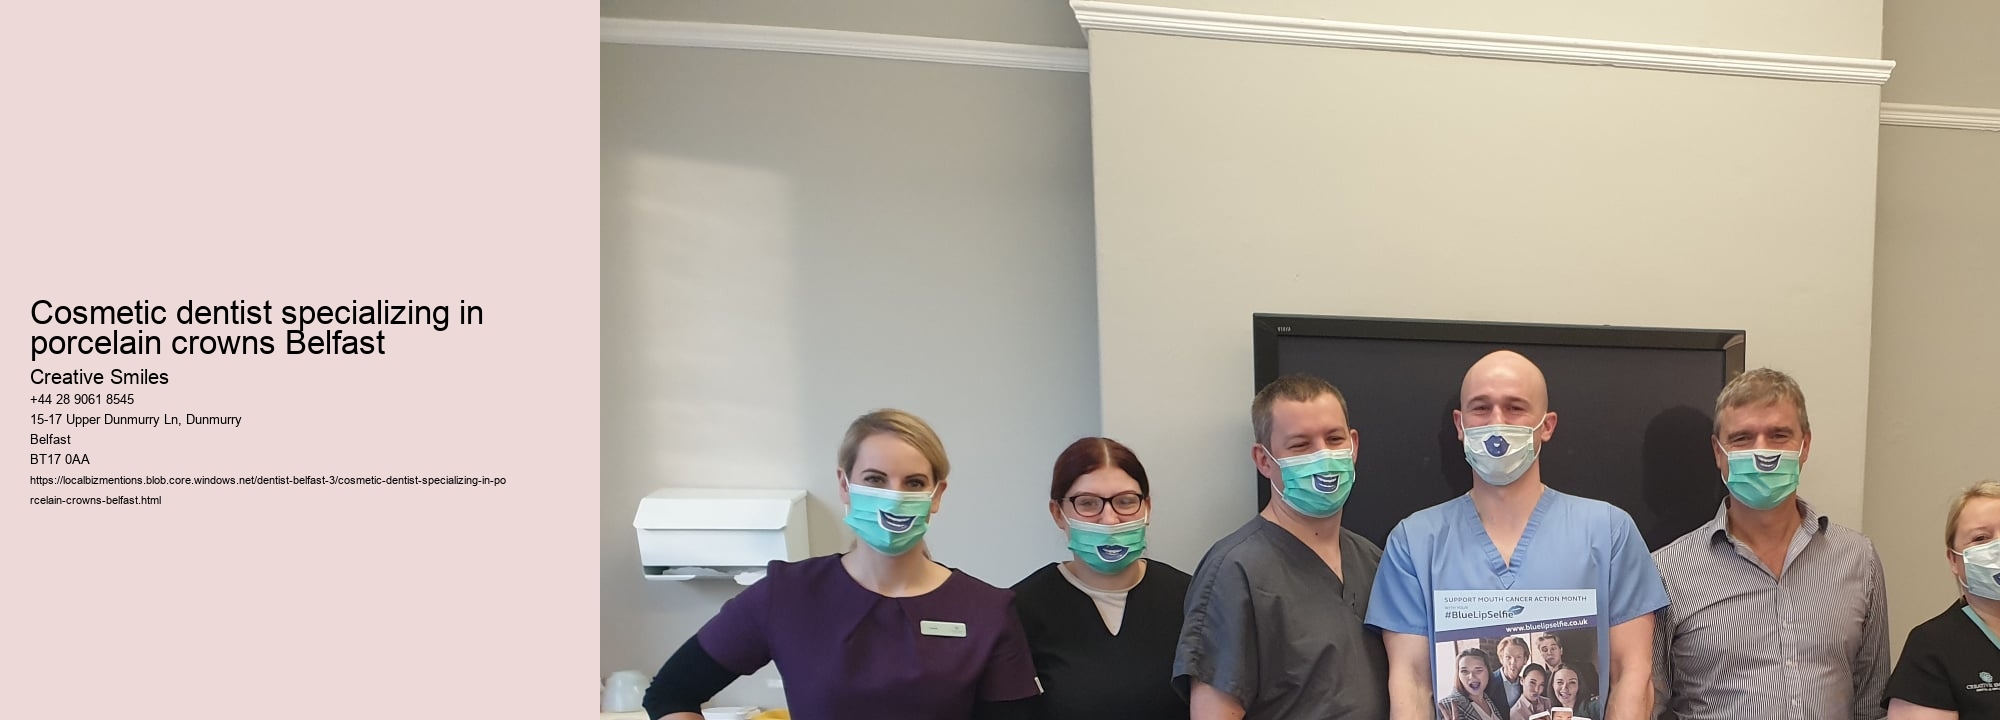 Cosmetic dentist specializing in porcelain crowns Belfast